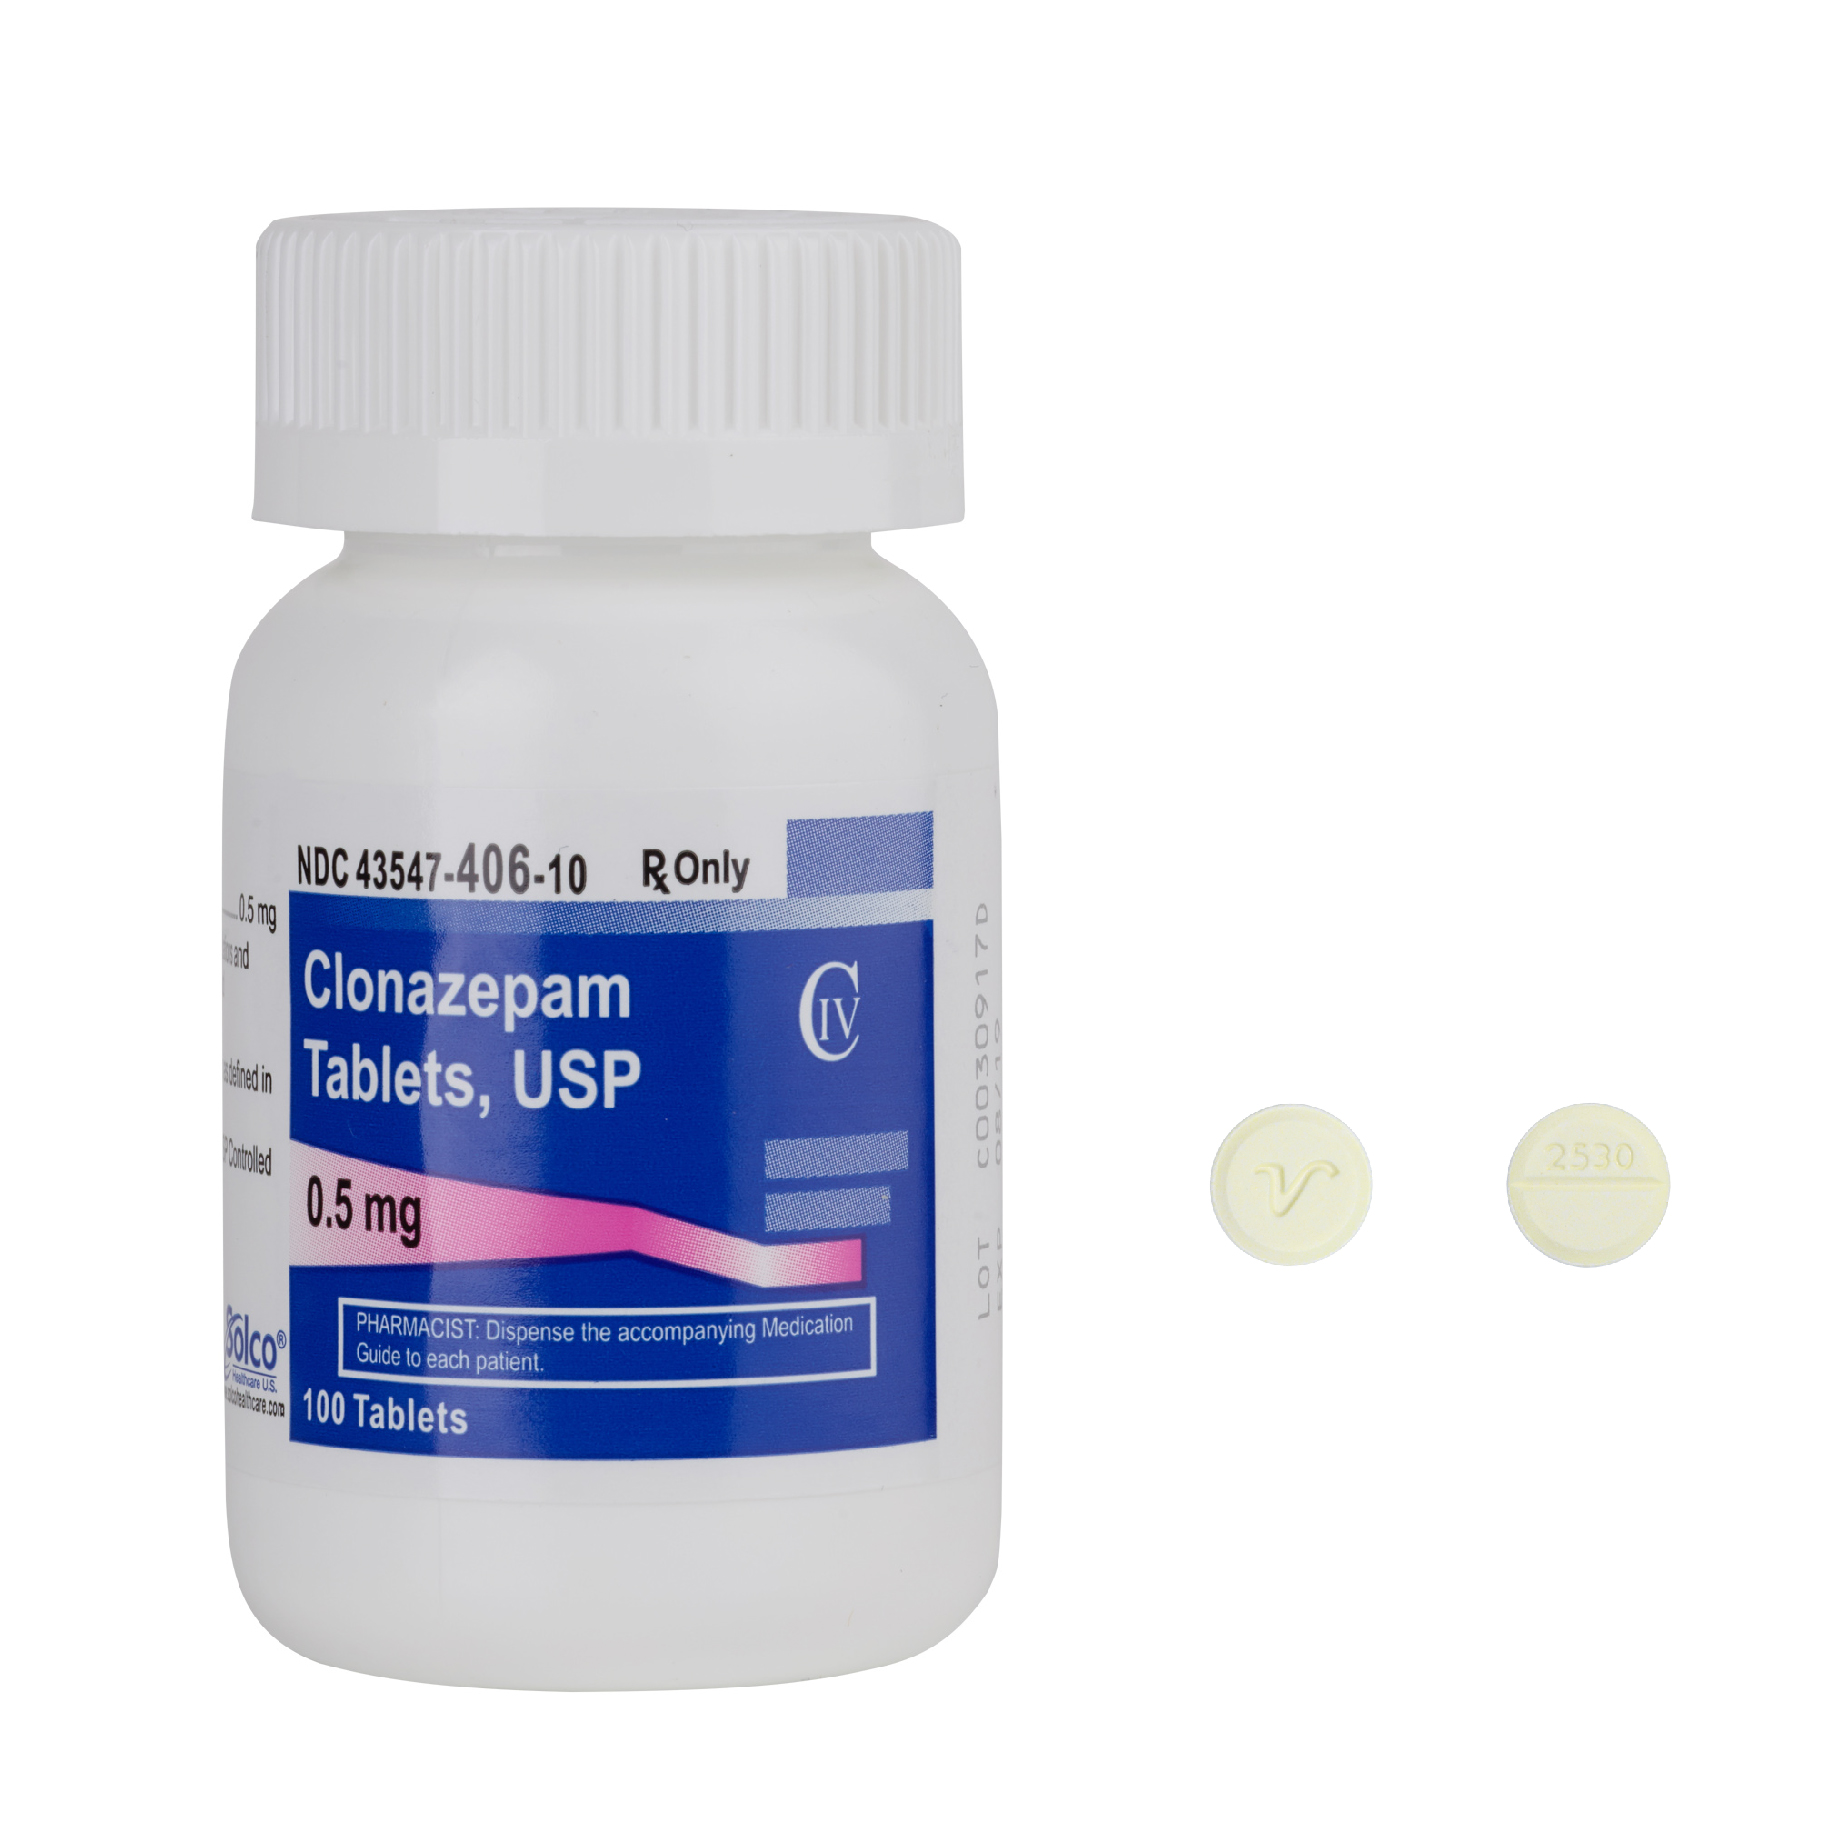 Buy Klonopin online overnight And get Free home delivery Career